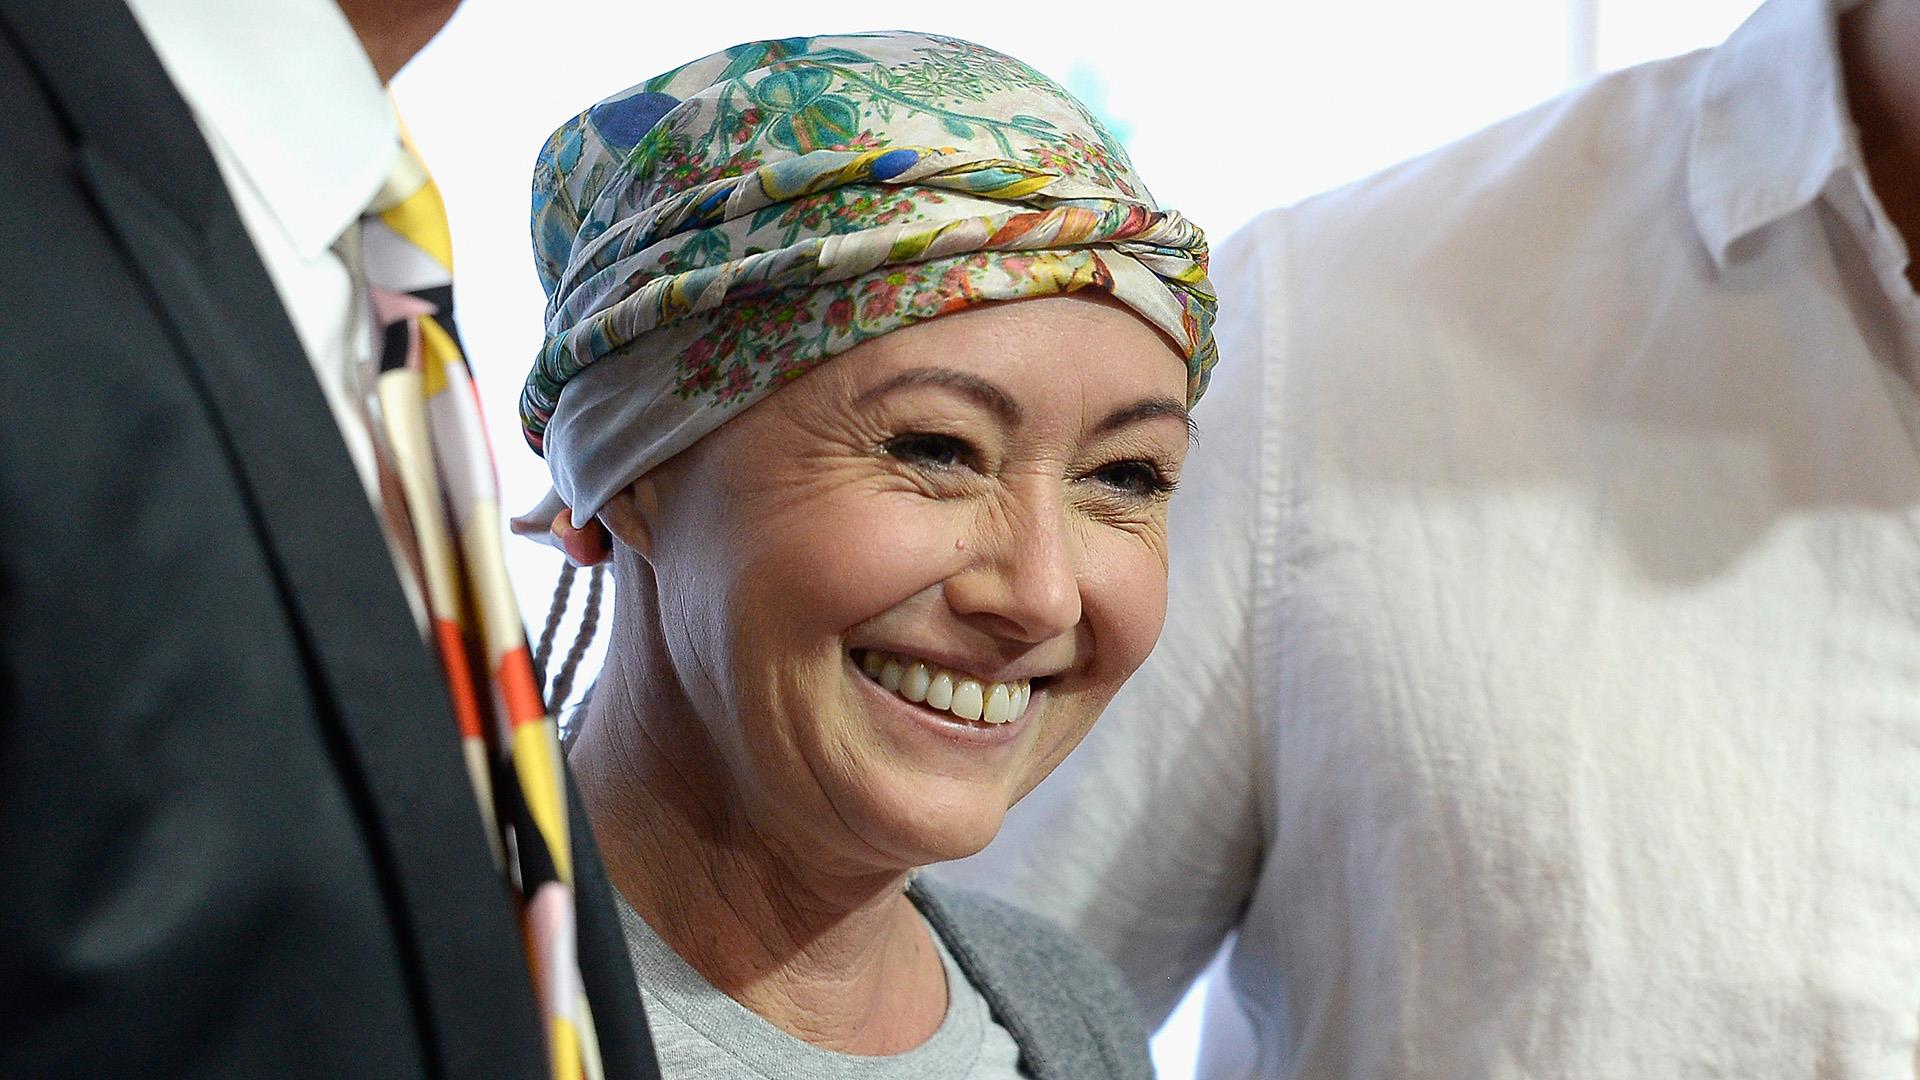 Shannen Doherty Says She S Dying Of Stage 4 Terminal Cancer In New Court Documents